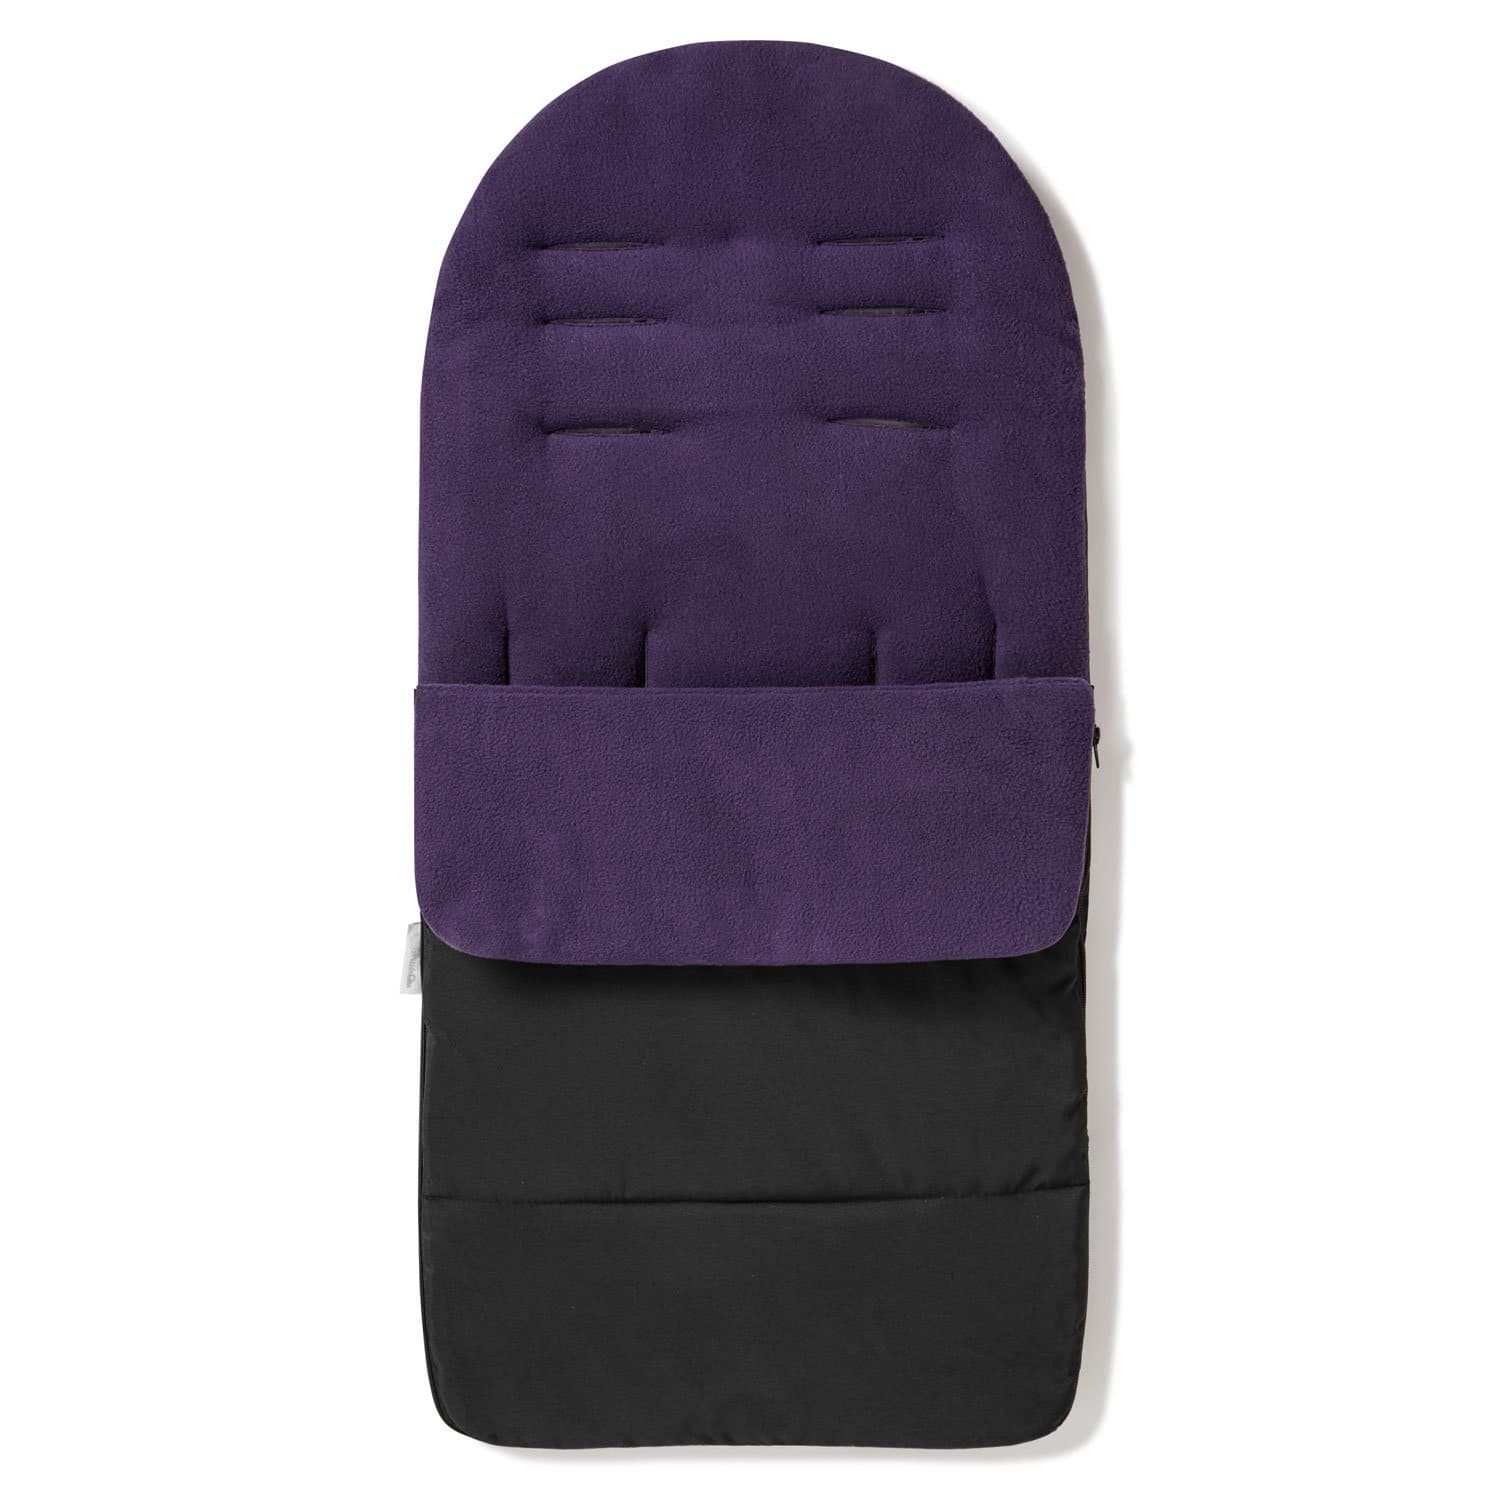 Premium Footmuff / Cosy Toes Compatible with Valco - Plum Purple / Fits All Models | For Your Little One